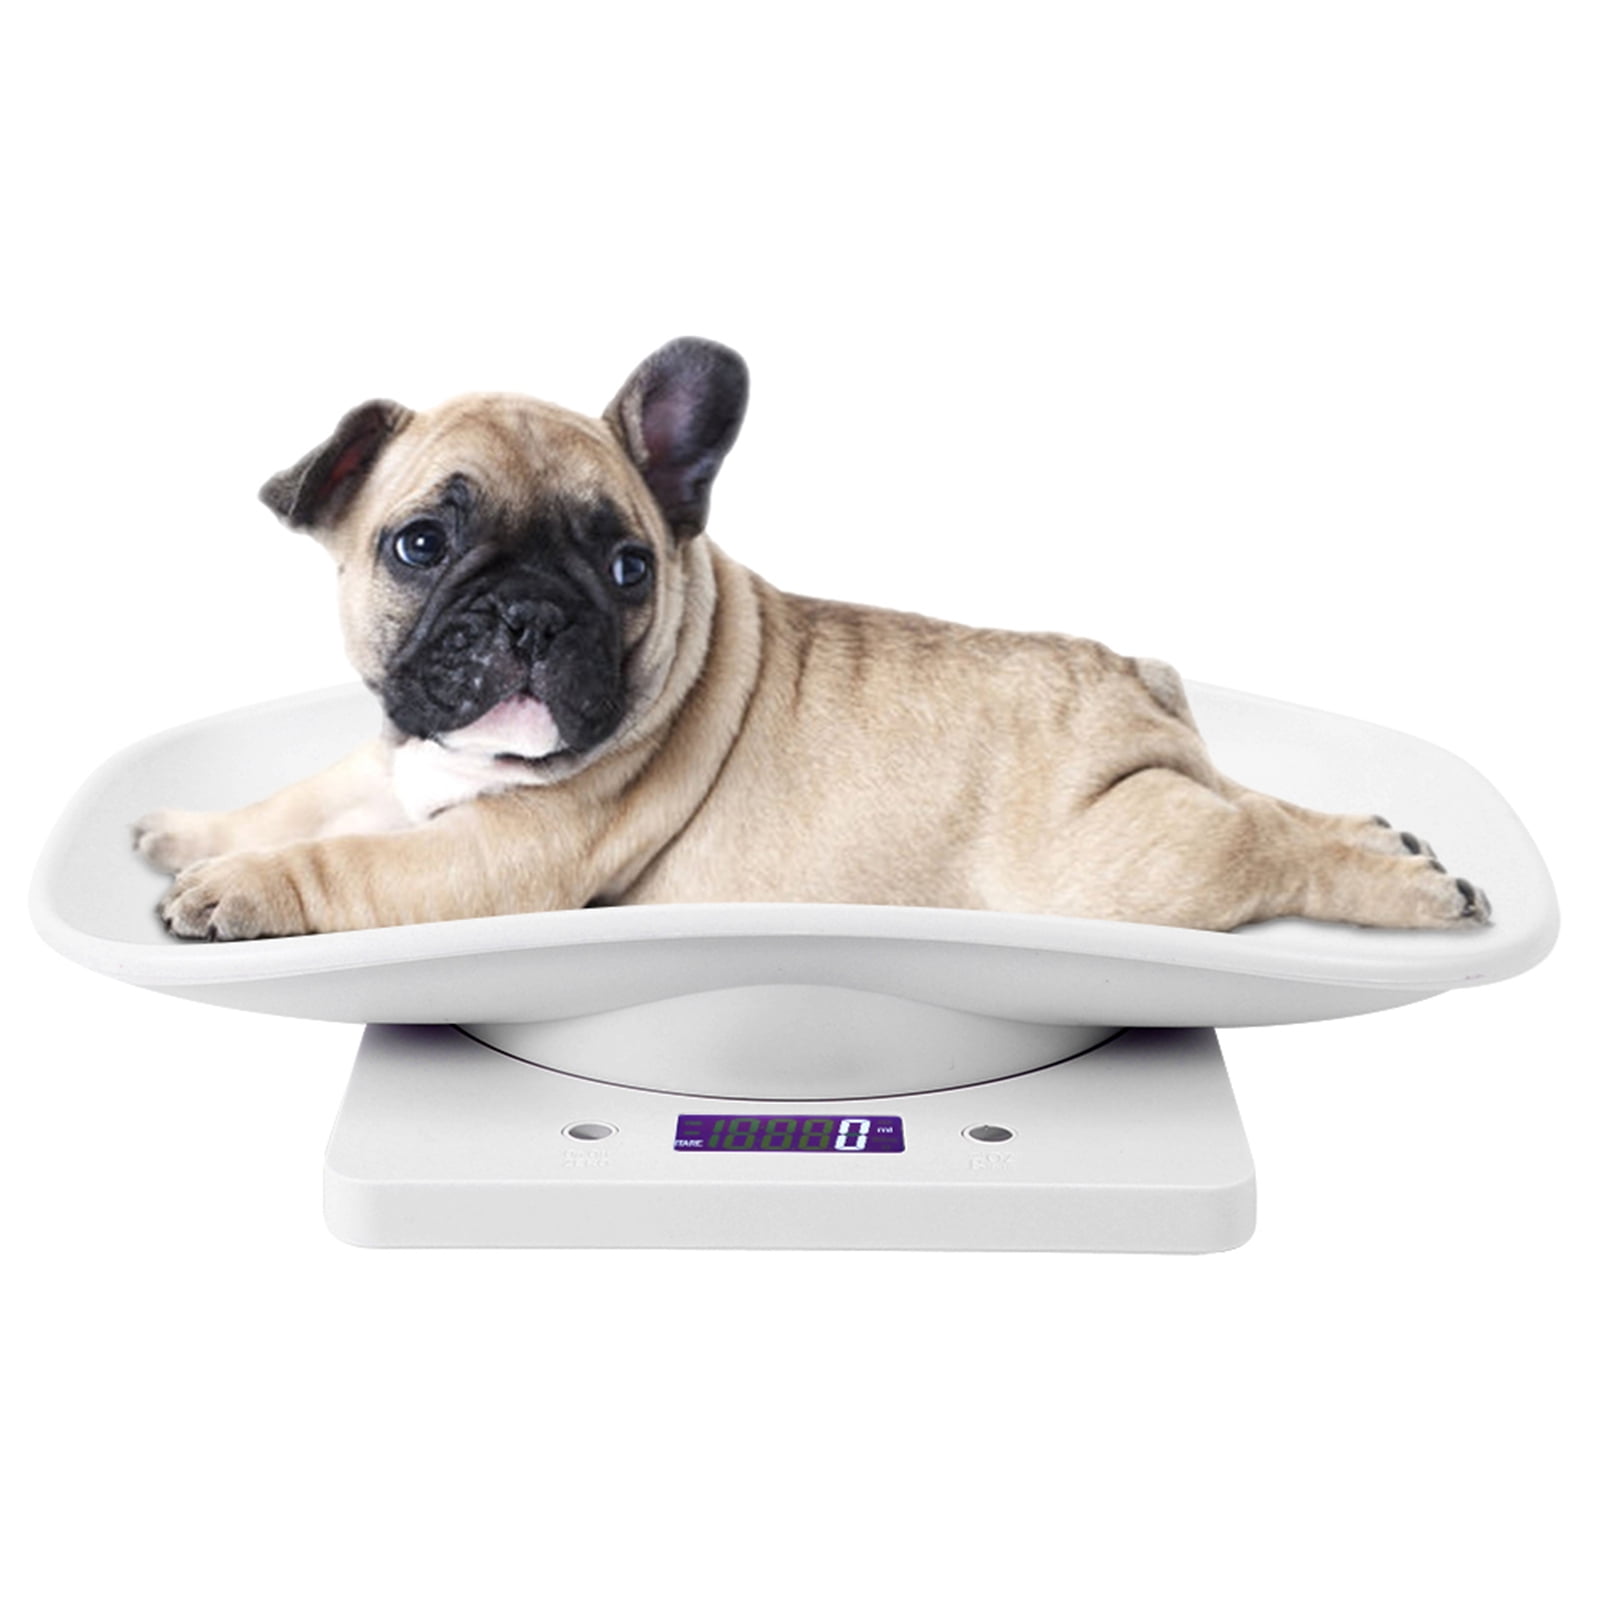 ICARE-PET Pet Scale for Newborn Puppy and Kitten, Pet Scale with Detachable Tray for Dog Whelping Nursing, Weigh Pets Baby in Grams, 33lbs